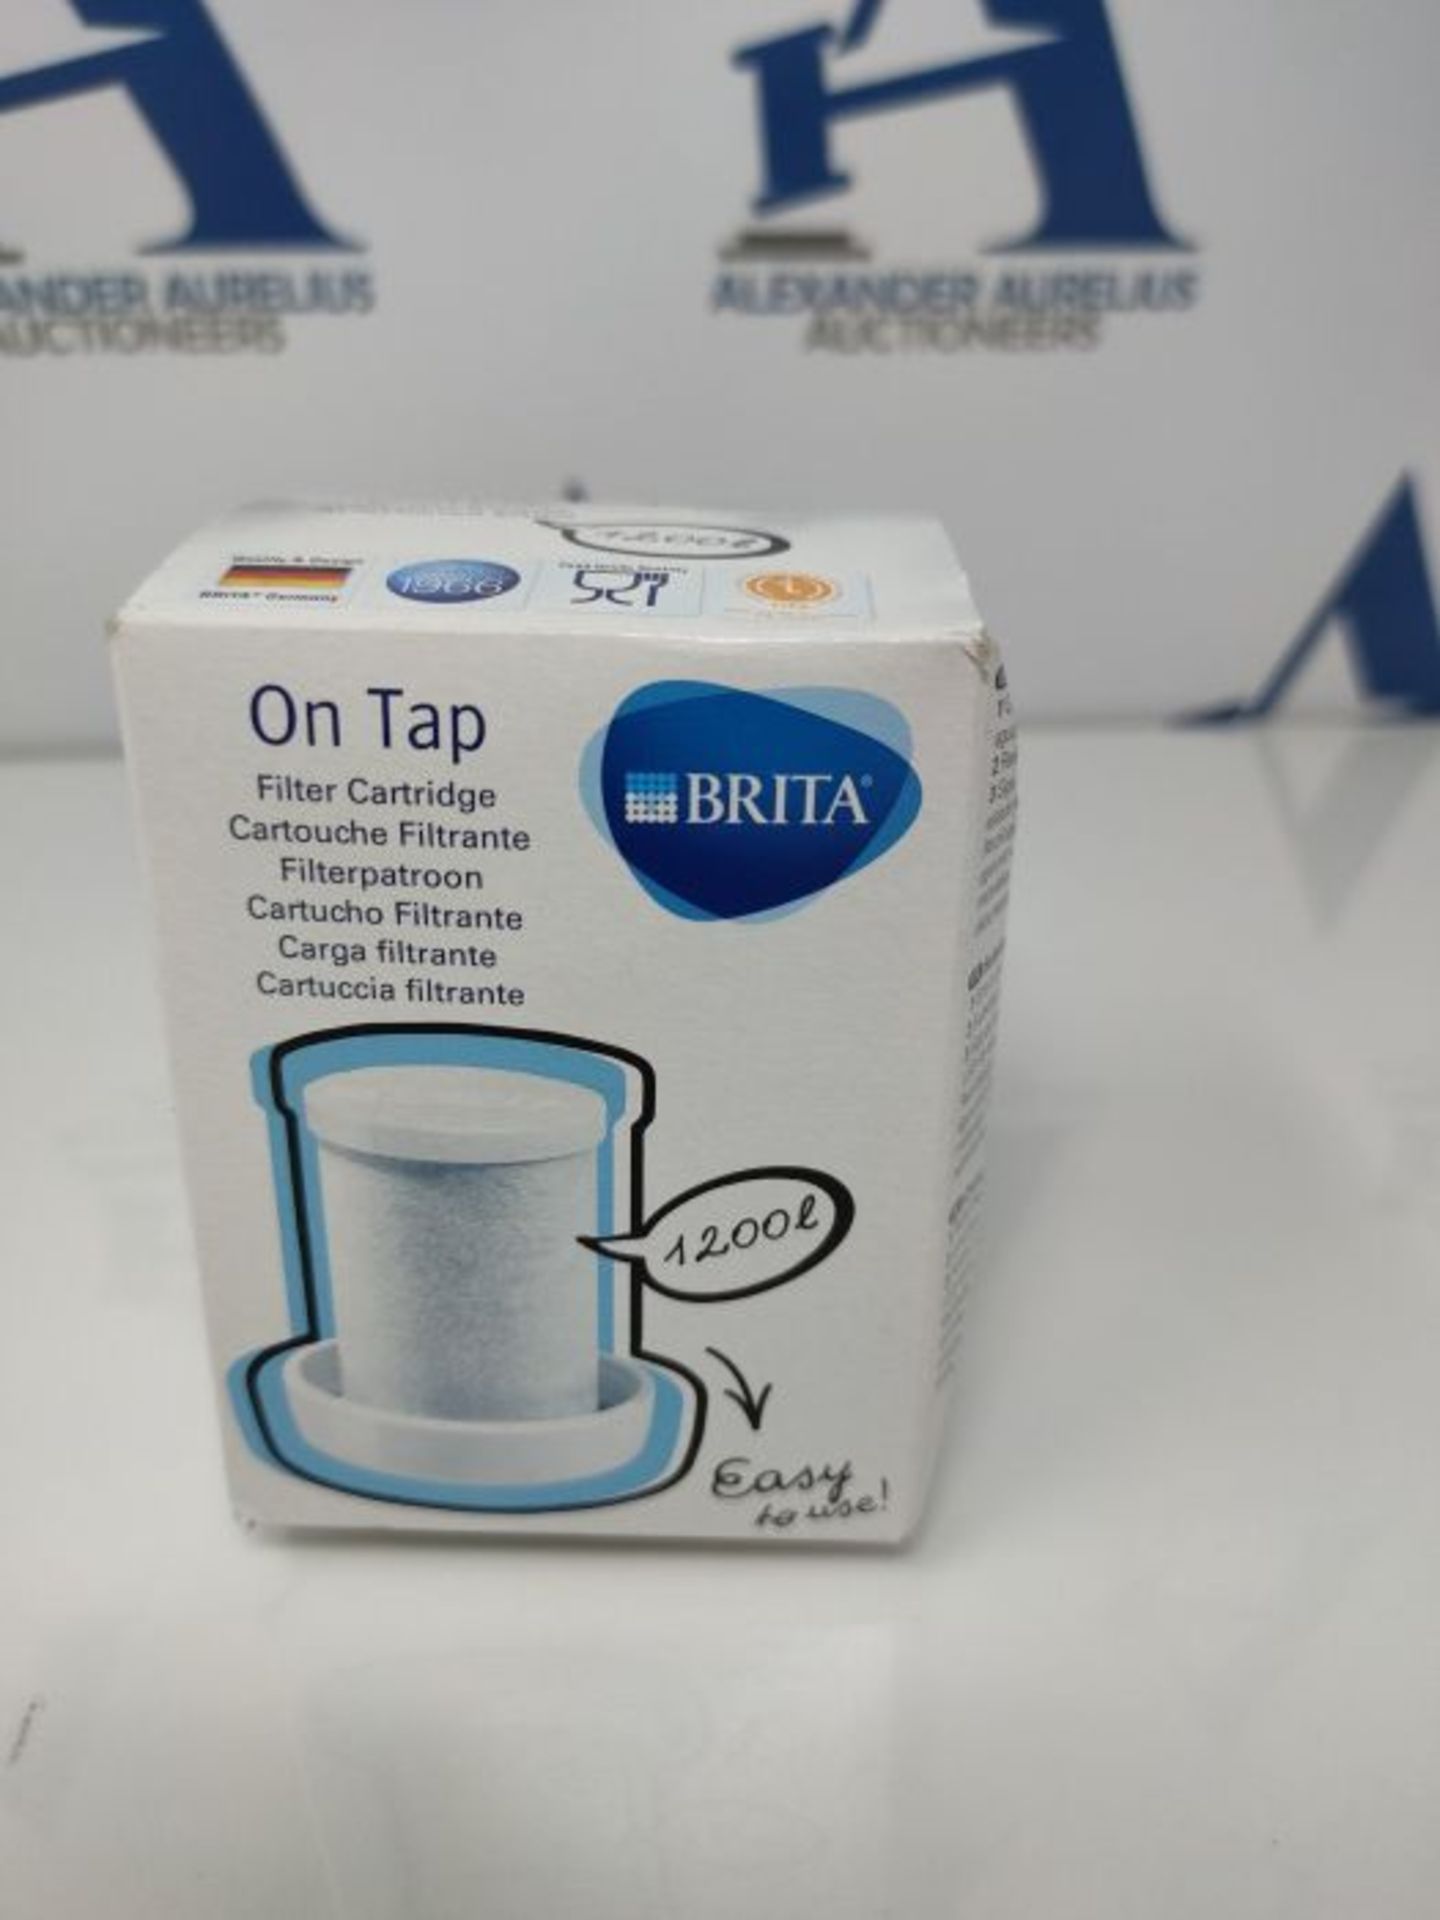 BRITA On Tap - Tap Water Filter with 3-month refills for filtered water - 1 cartridge - Image 2 of 3